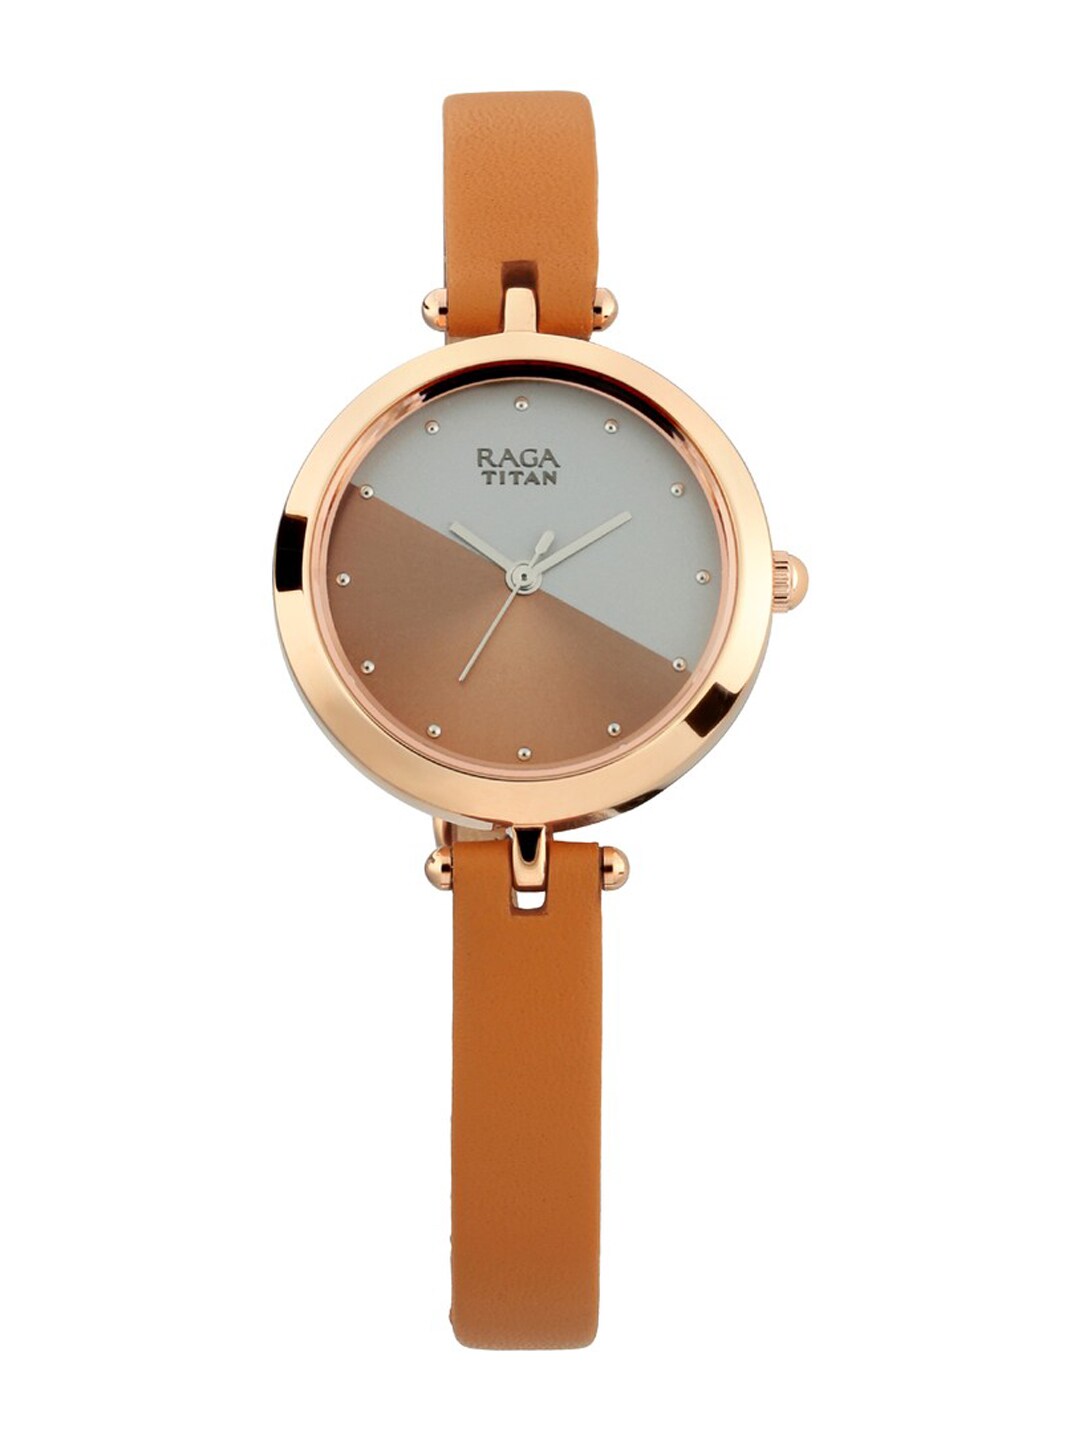 Titan Women Silver-Toned & Bronze-Toned Colourblocked Analogue Watch 2606WL01 Price in India